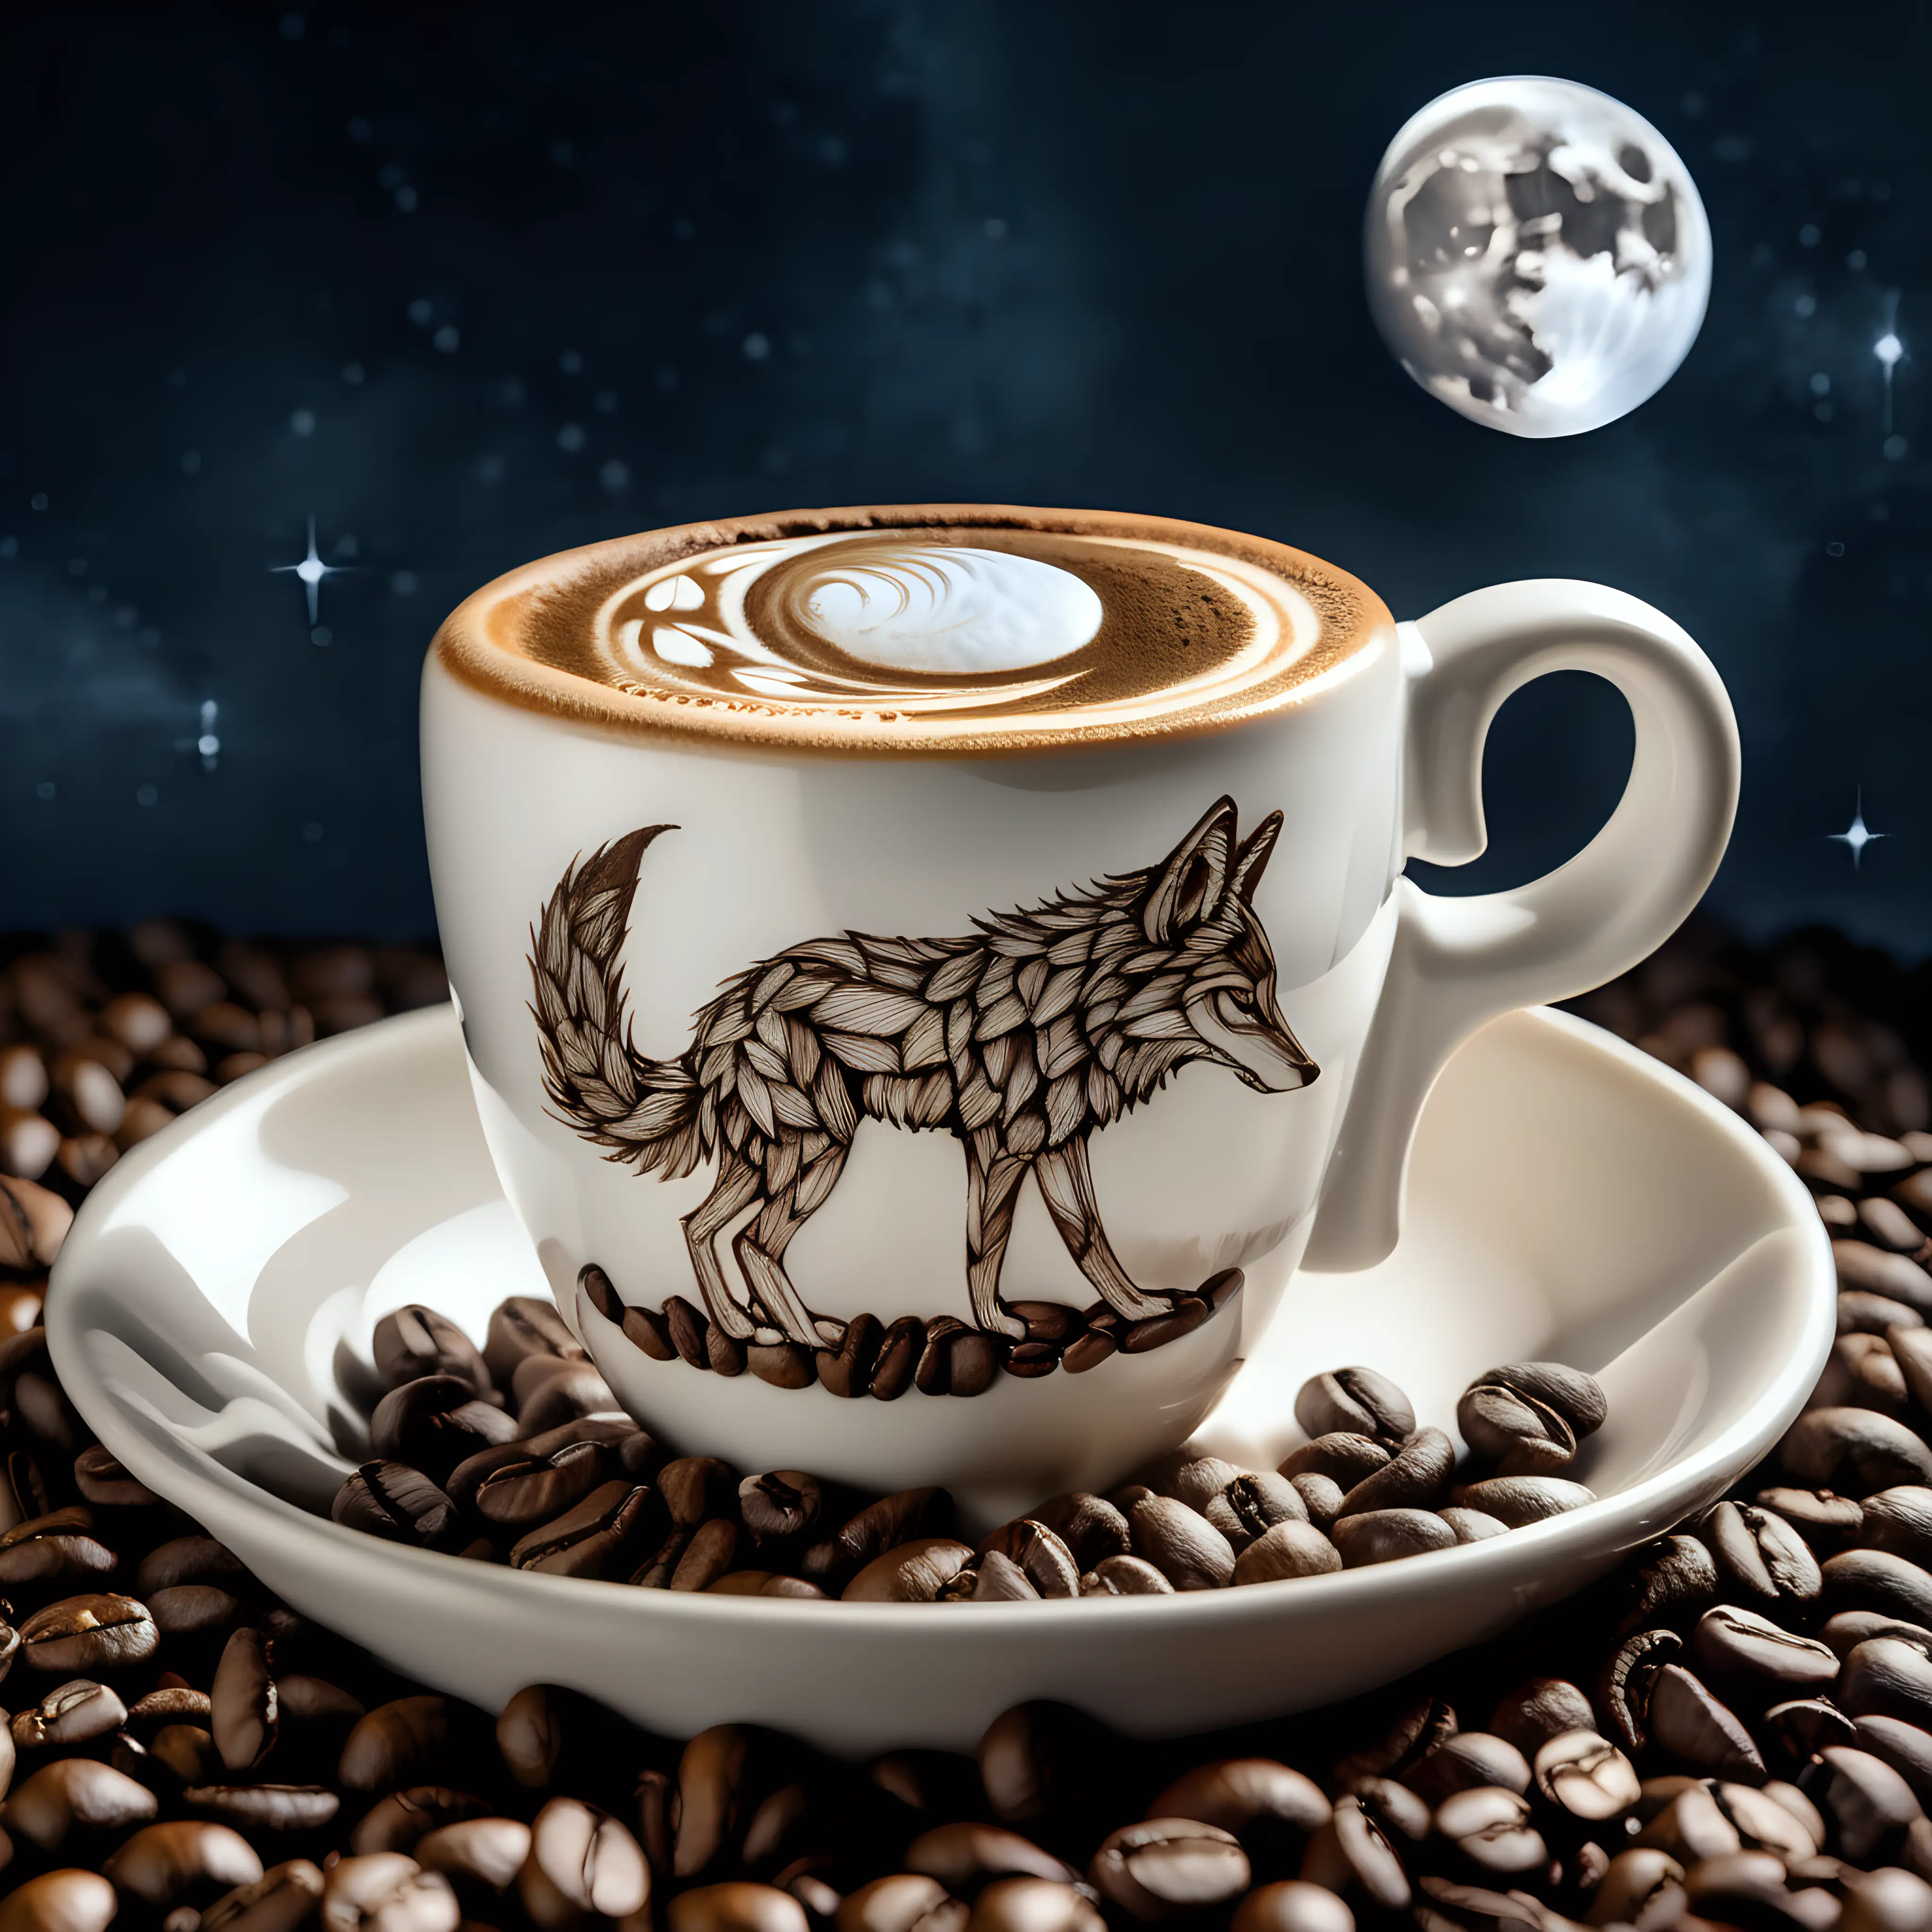 Roasted Coffee grains forming the shape of a beautiful howling coyote at the moon. But the full moon is a cup with latte art
